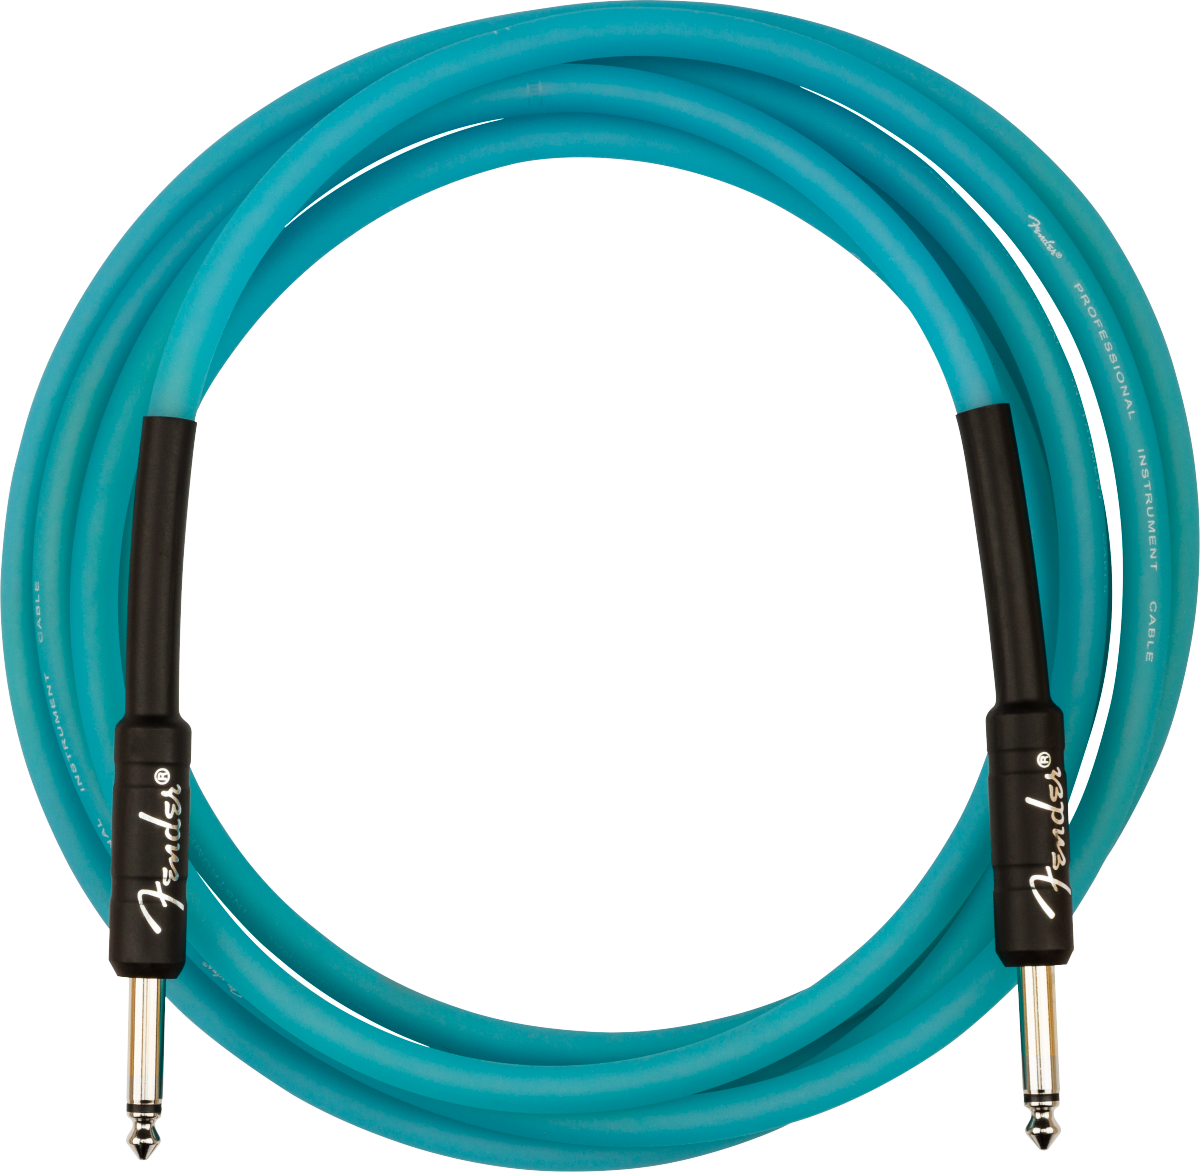 FENDER PRO 10FT GLOW IN THE DARK CABLES - BLUE